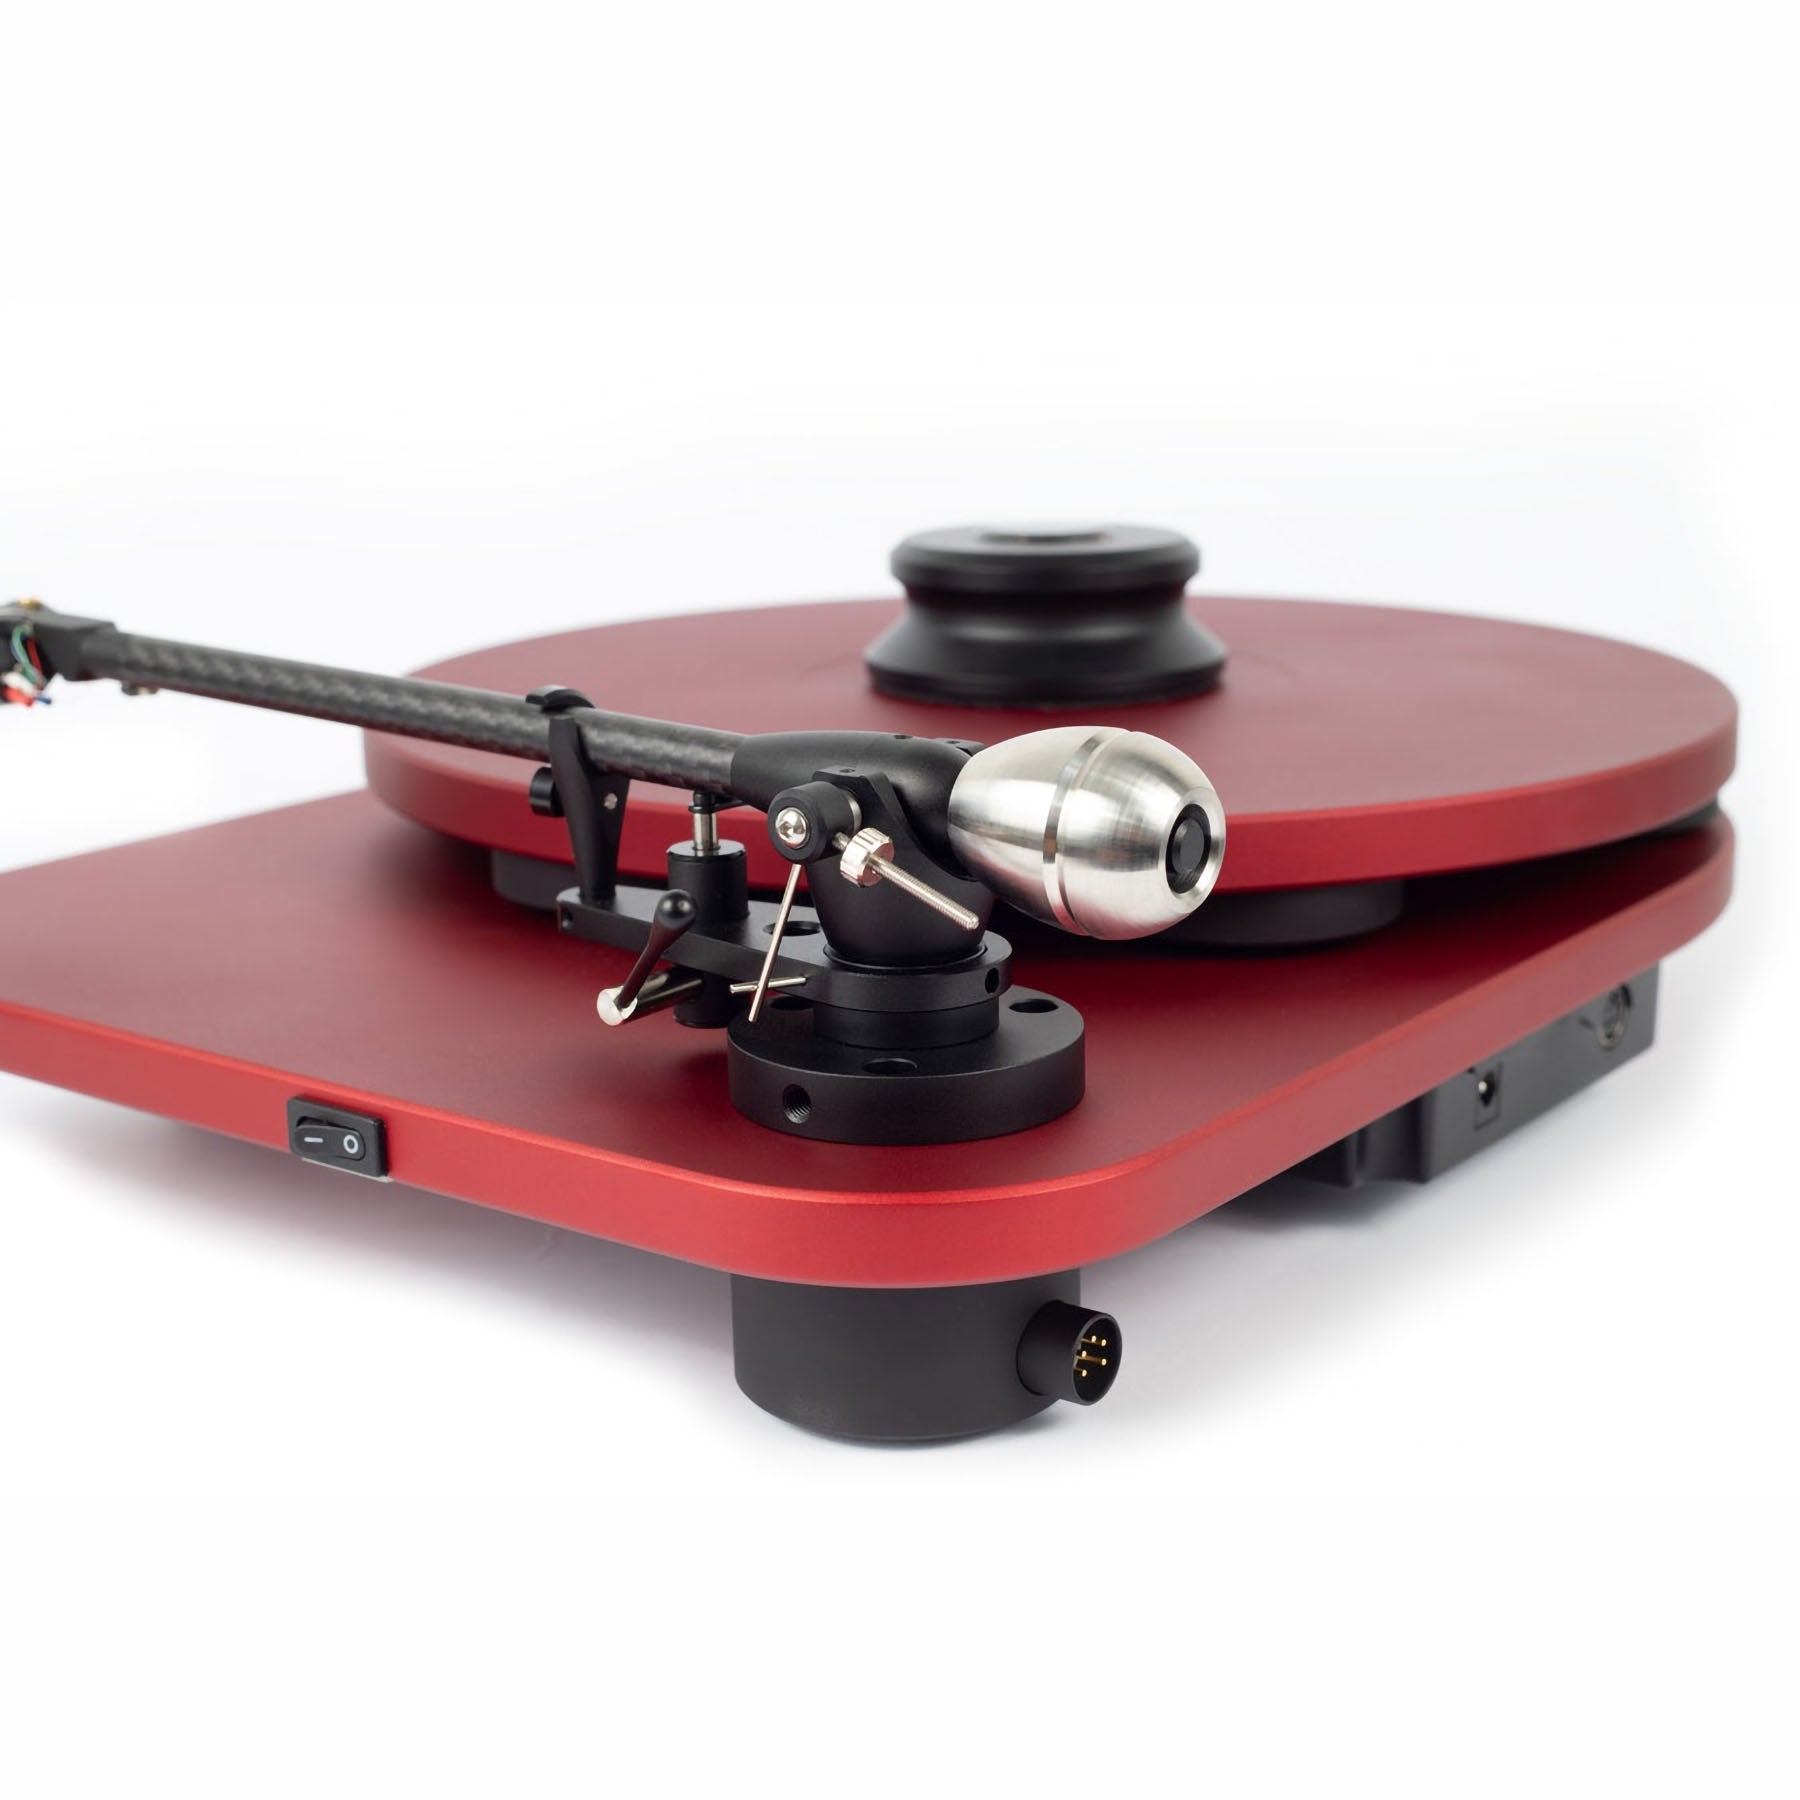 AURIS Bayadere 1 Turntable with W9 Tonearm